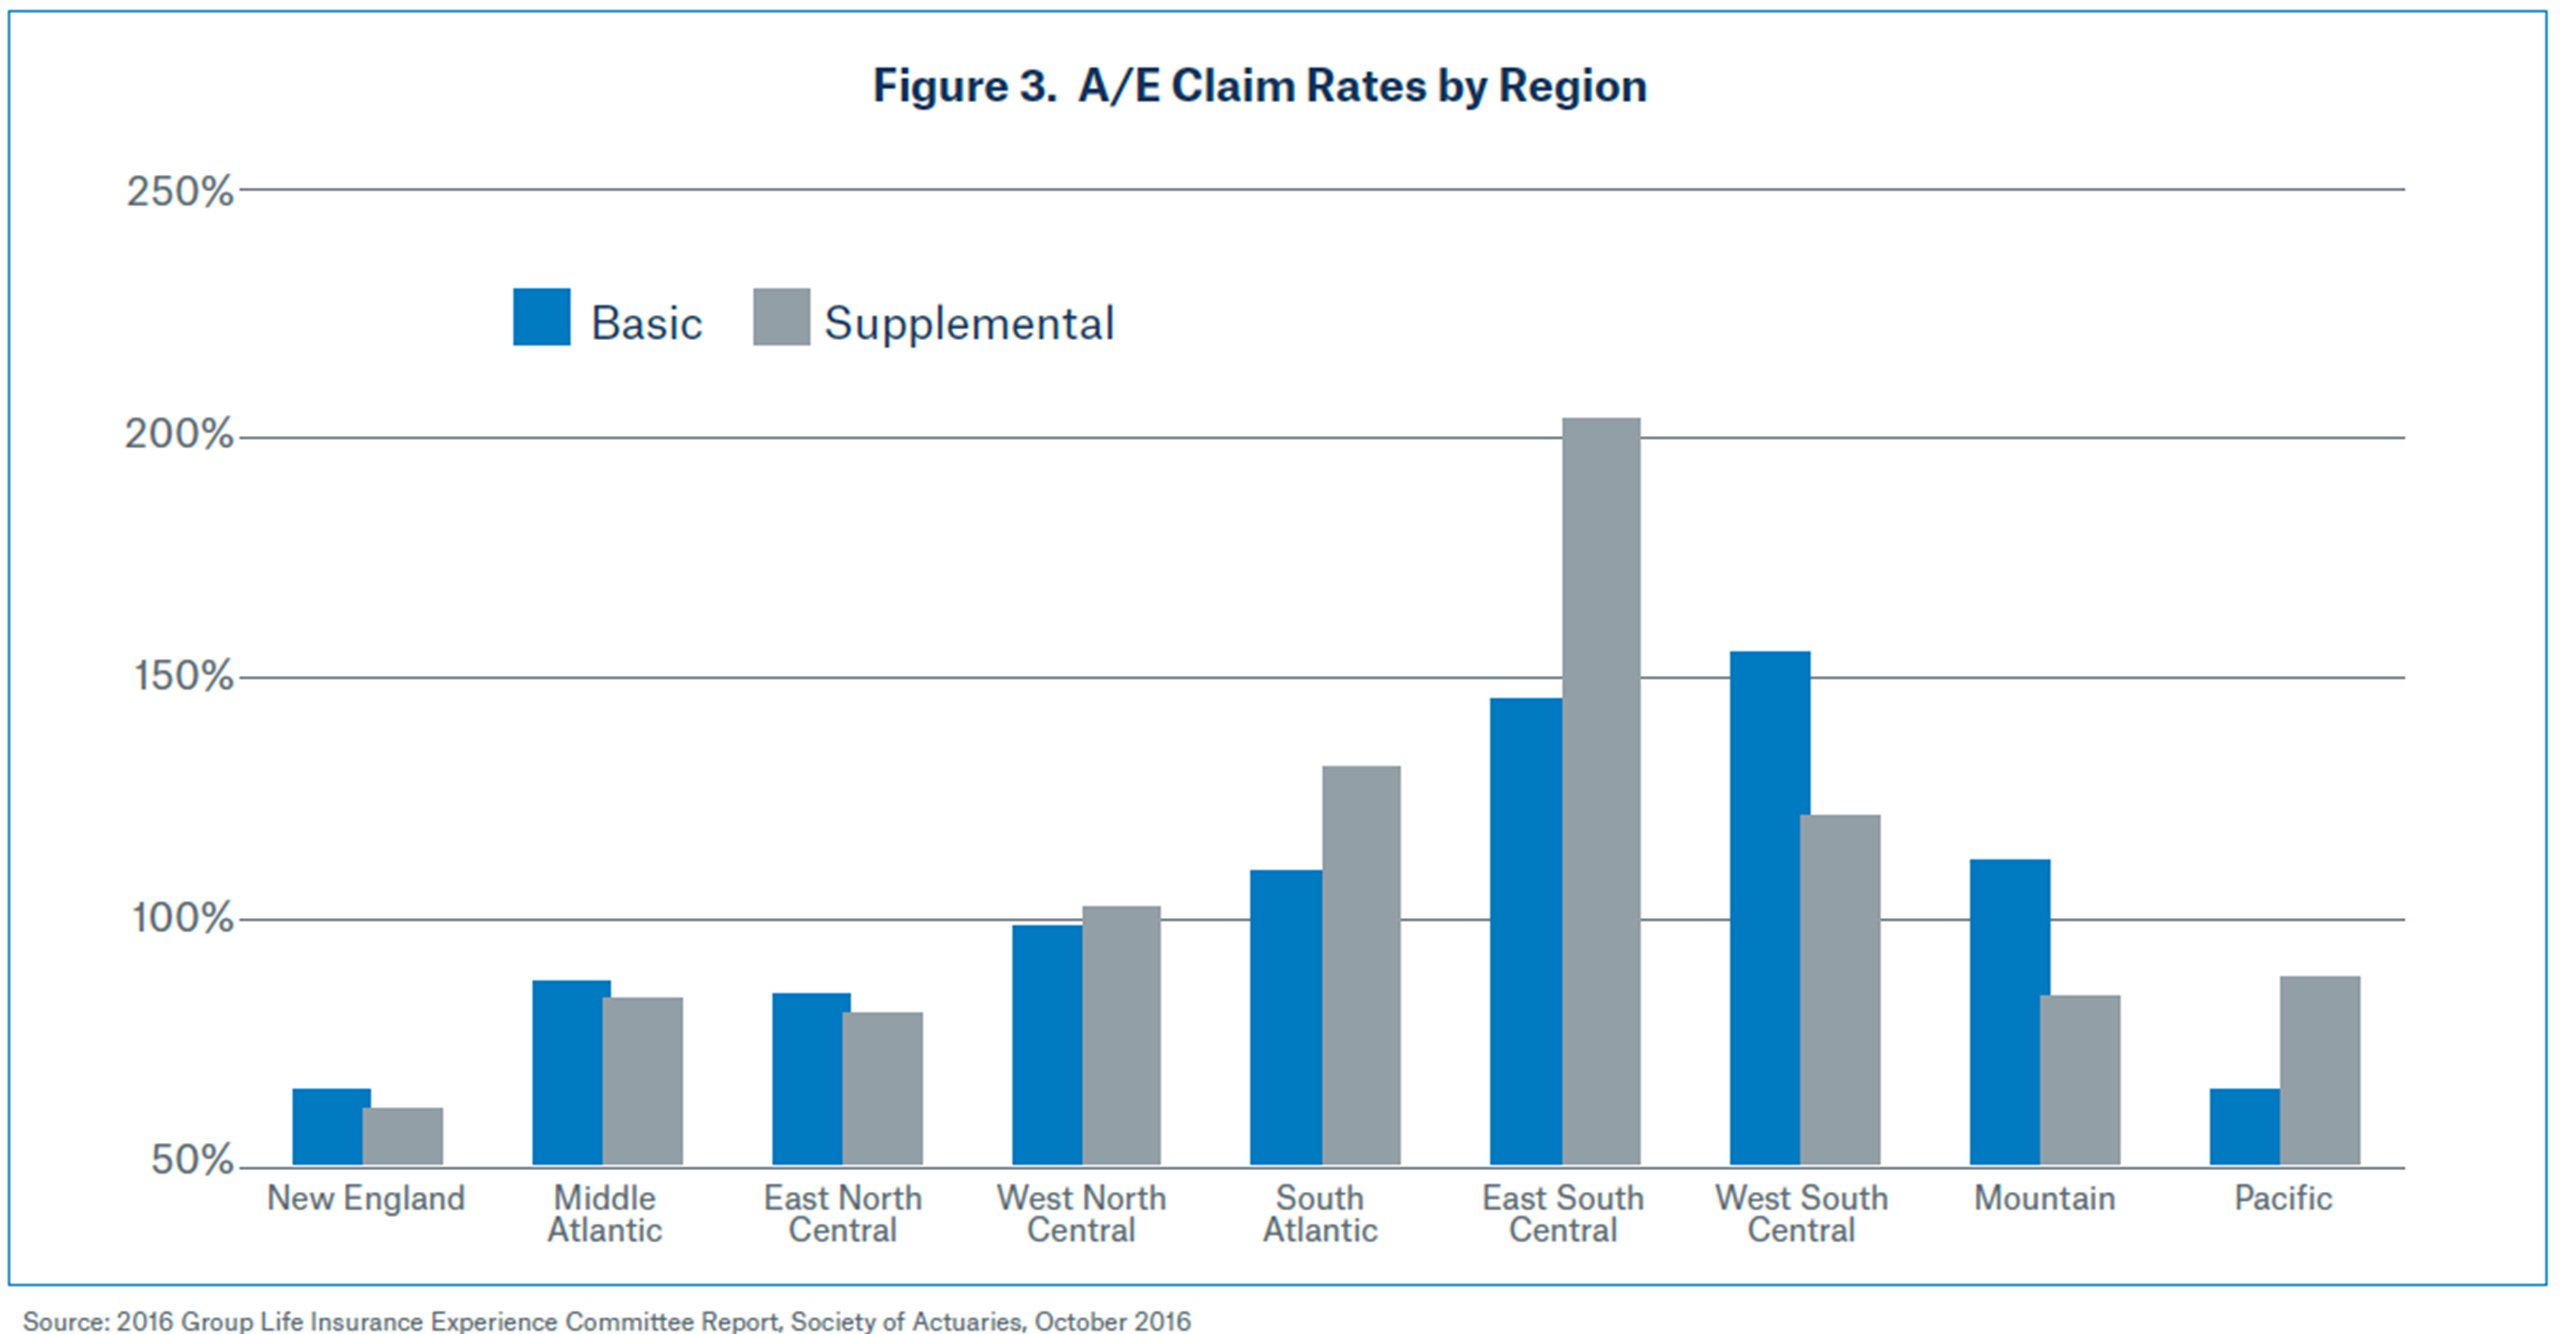 A/E Claim Rates by Region